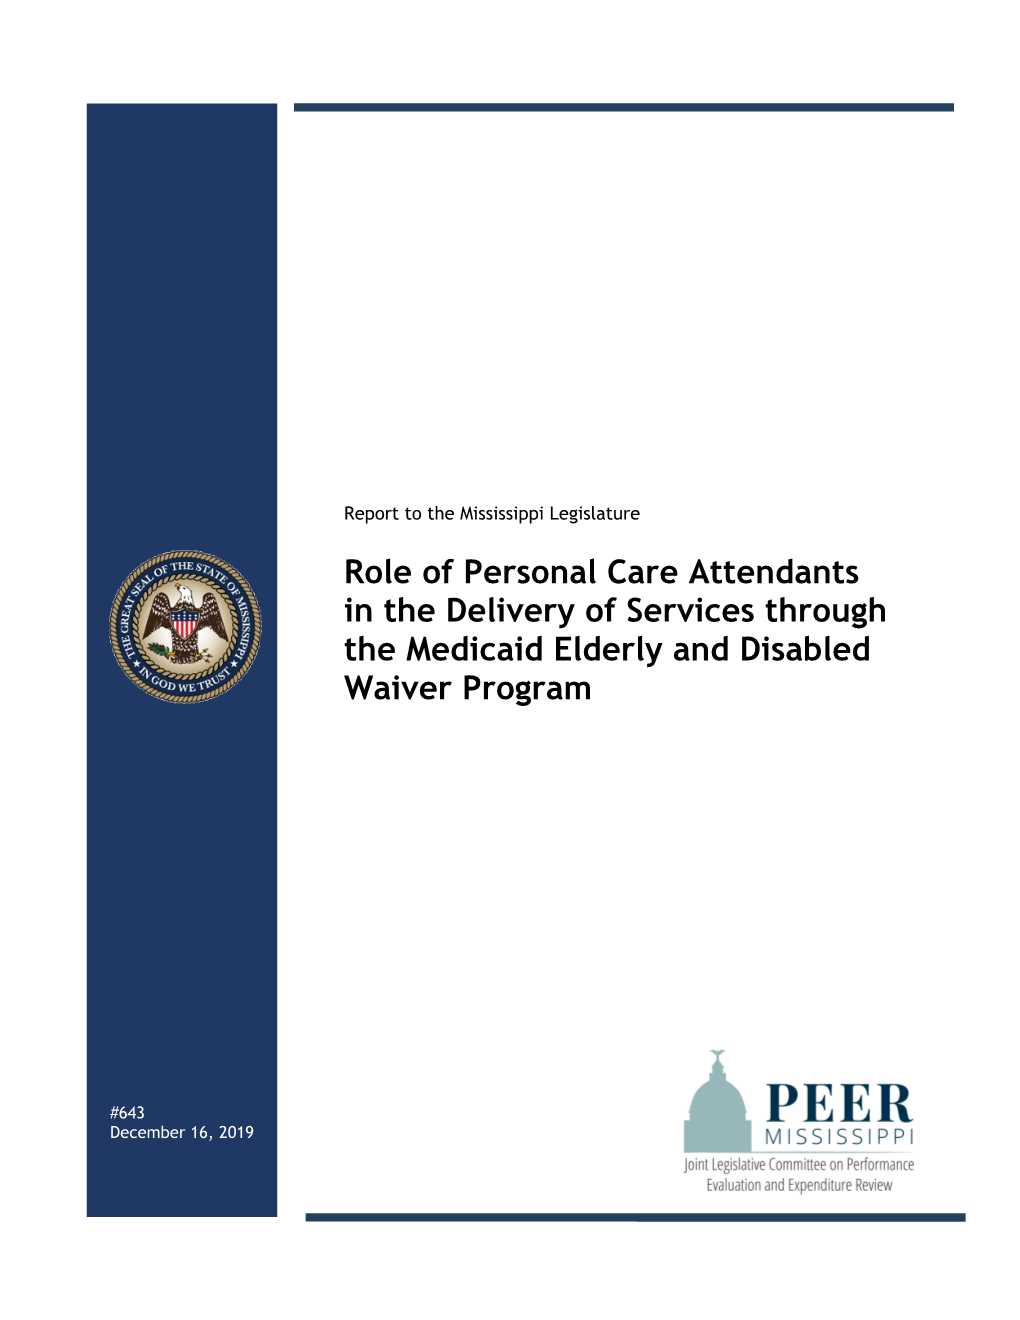 Role of Personal Care Attendants in the Delivery of Services Through the Medicaid Elderly and Disabled Waiver Program